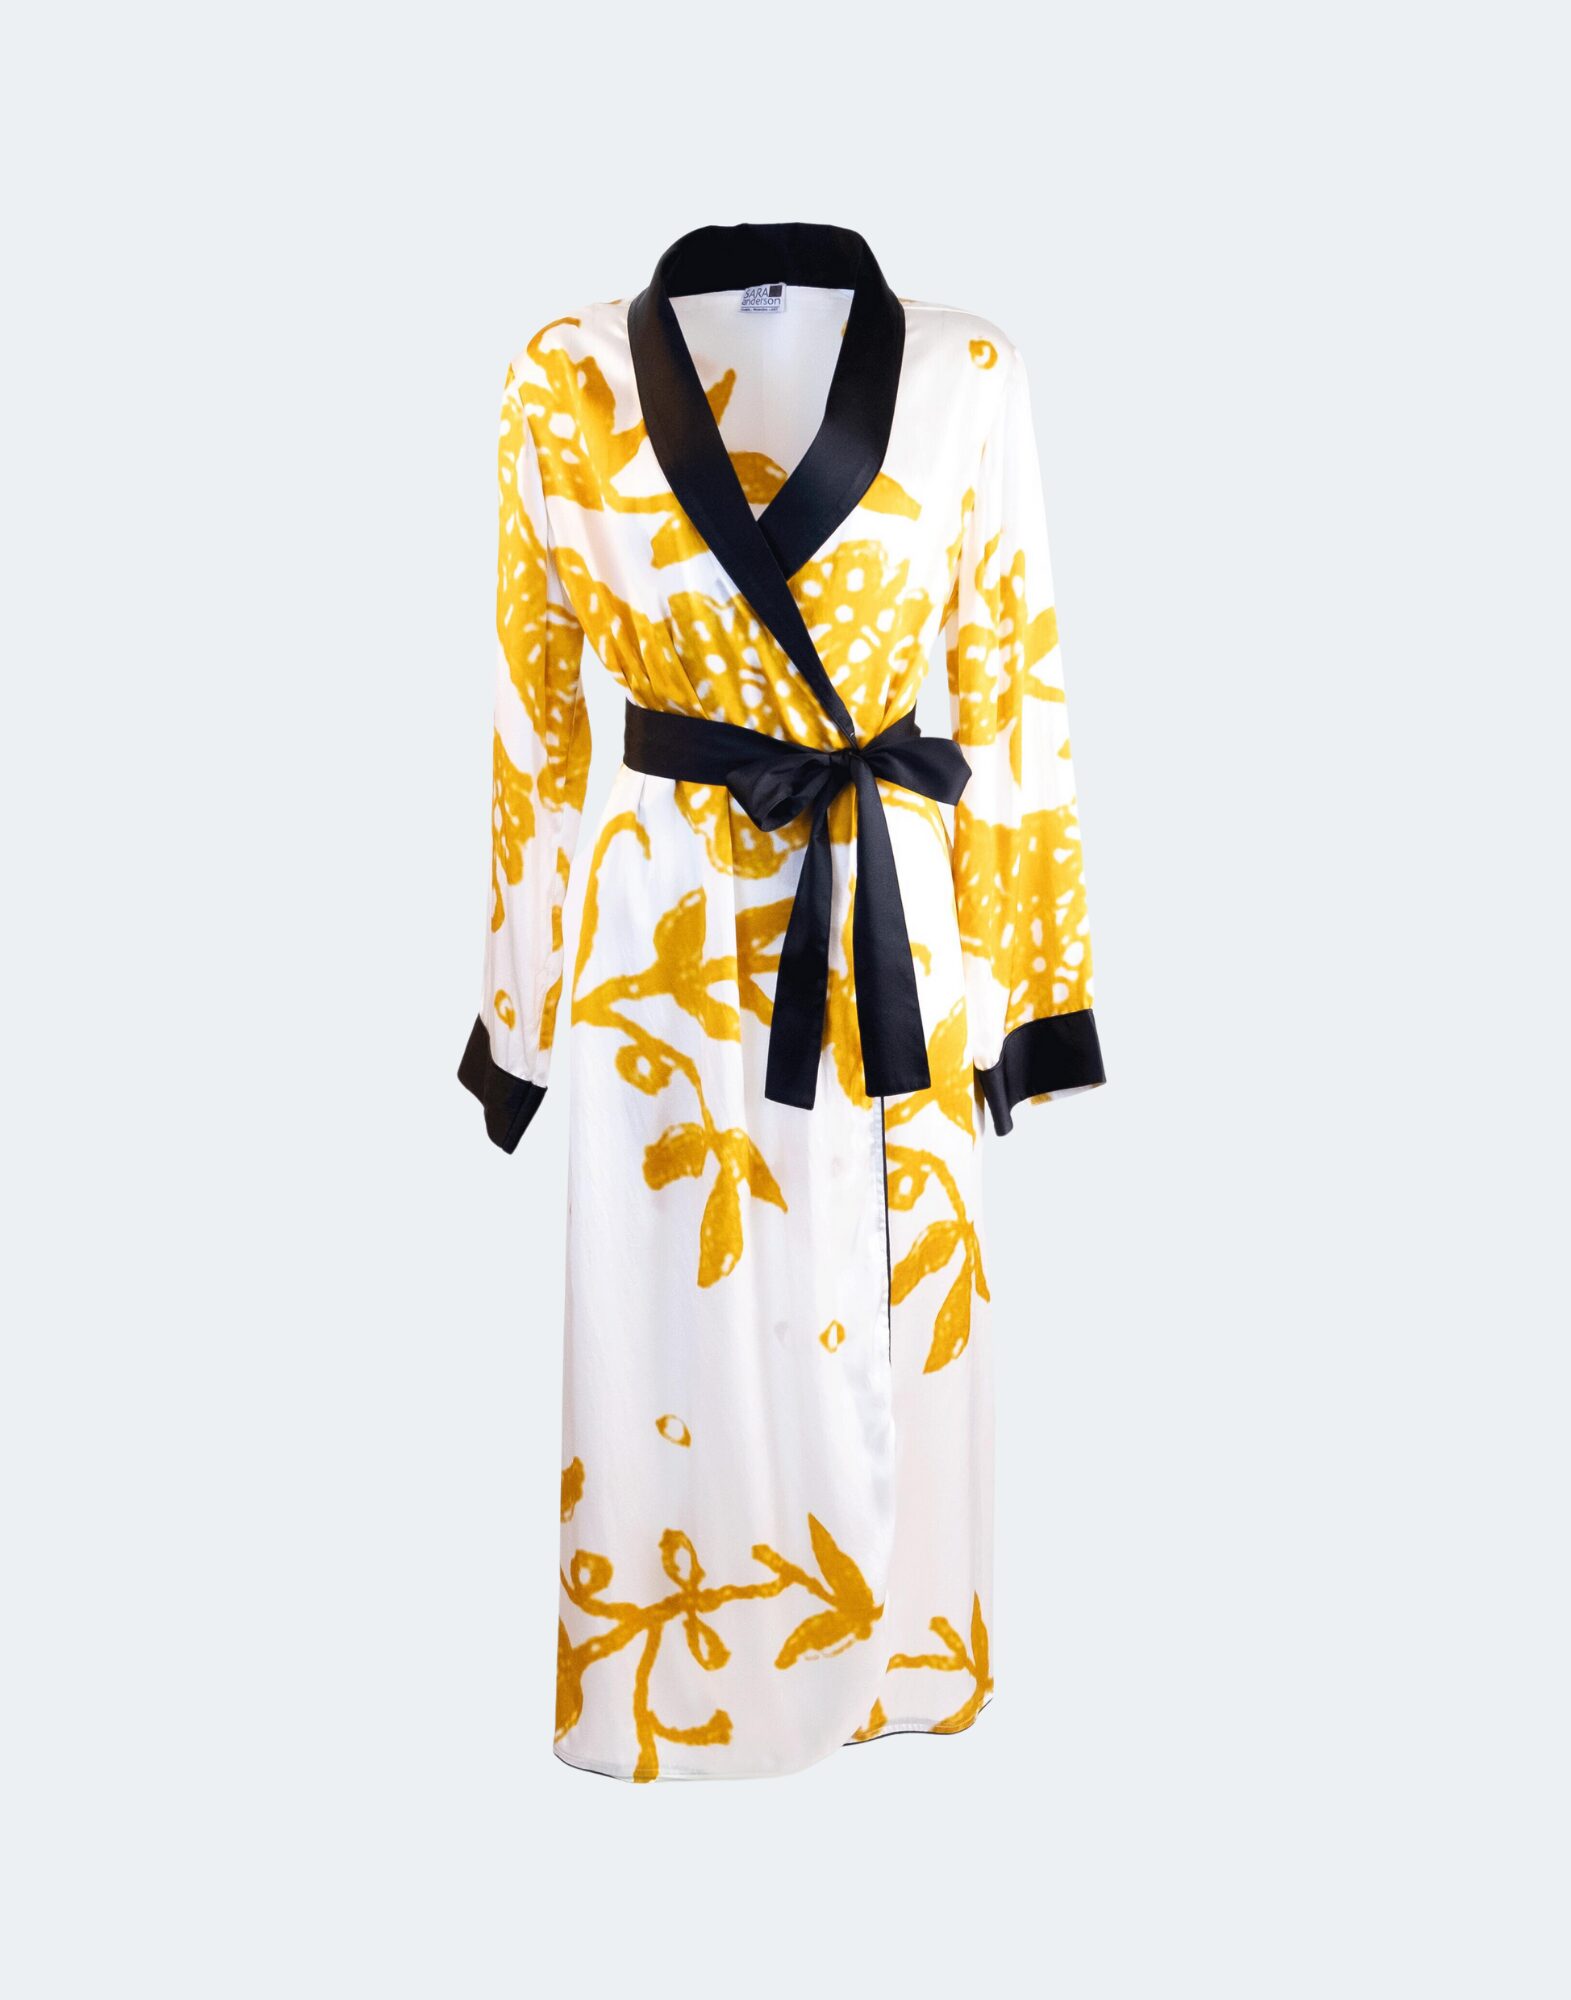 Yellow and white robe with black collar and sash